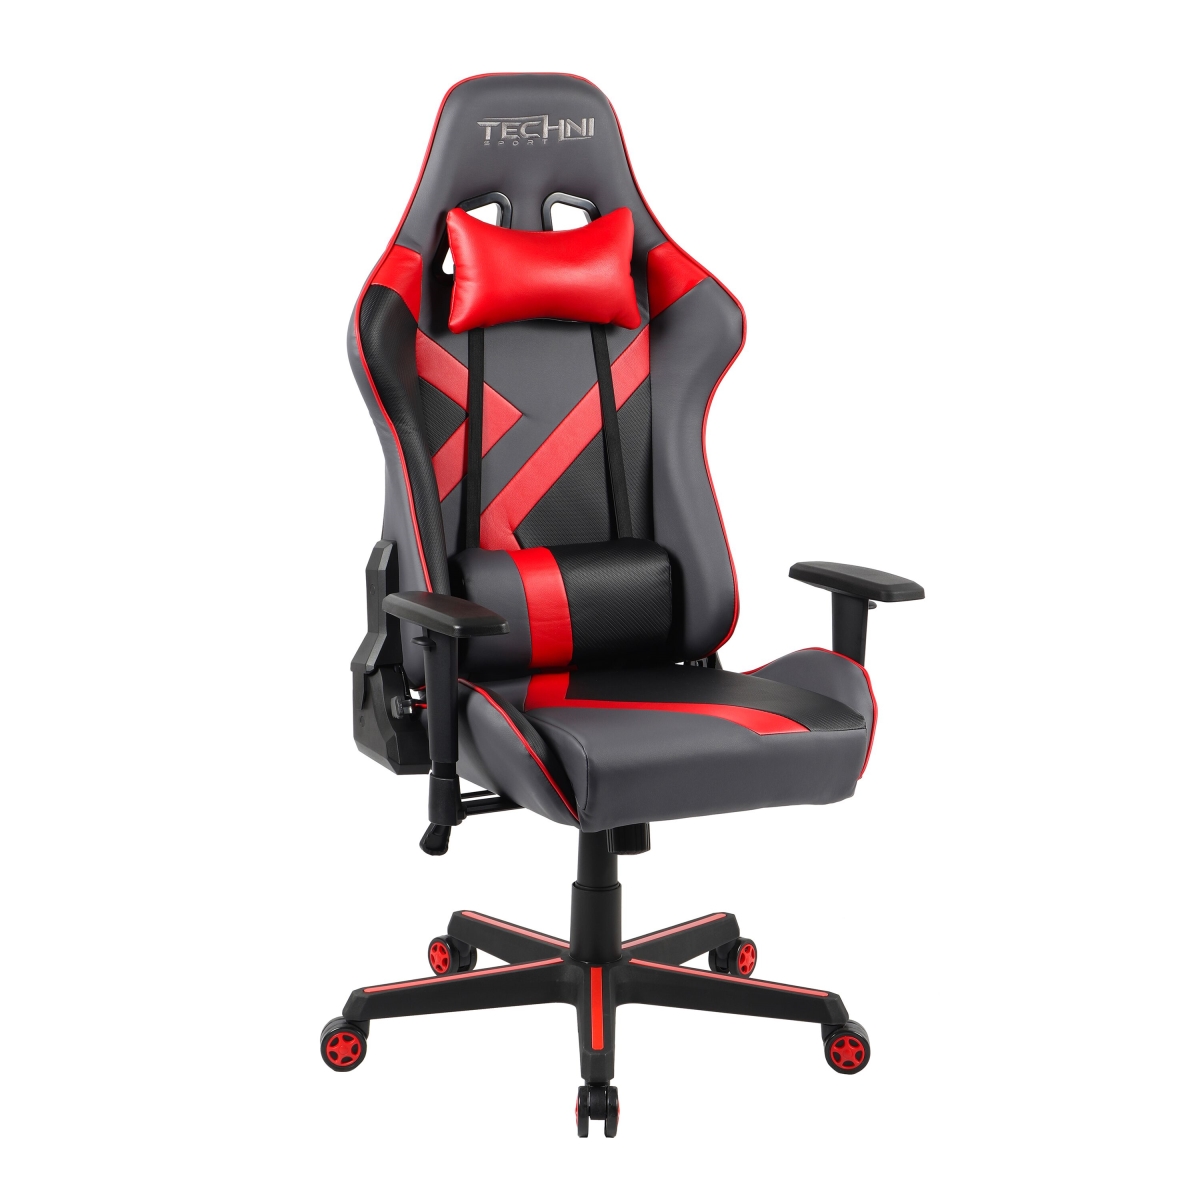 Rta-ts70-red Ts-70 Office-pc Gaming Chair, Red